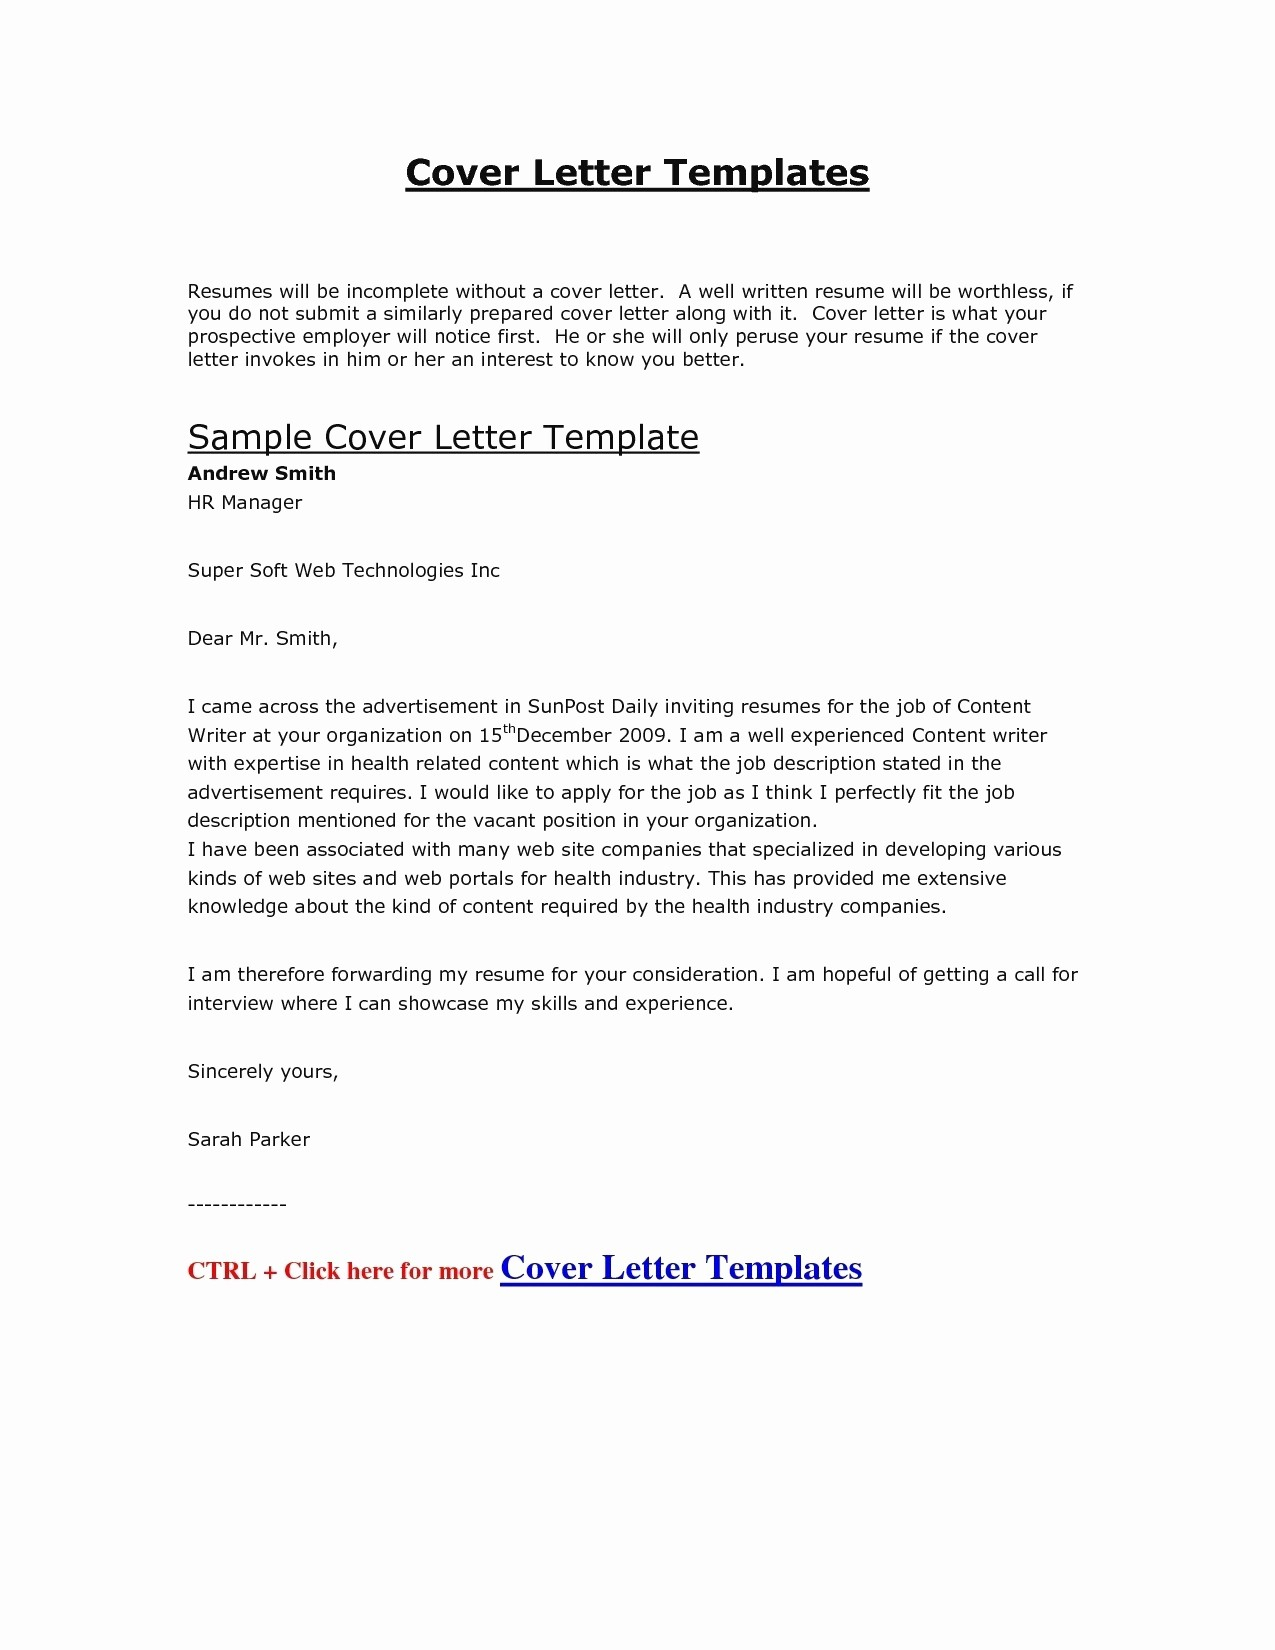 Successful Cover Letter Template - Job Application Letter format Template Copy Cover Letter Template Hr